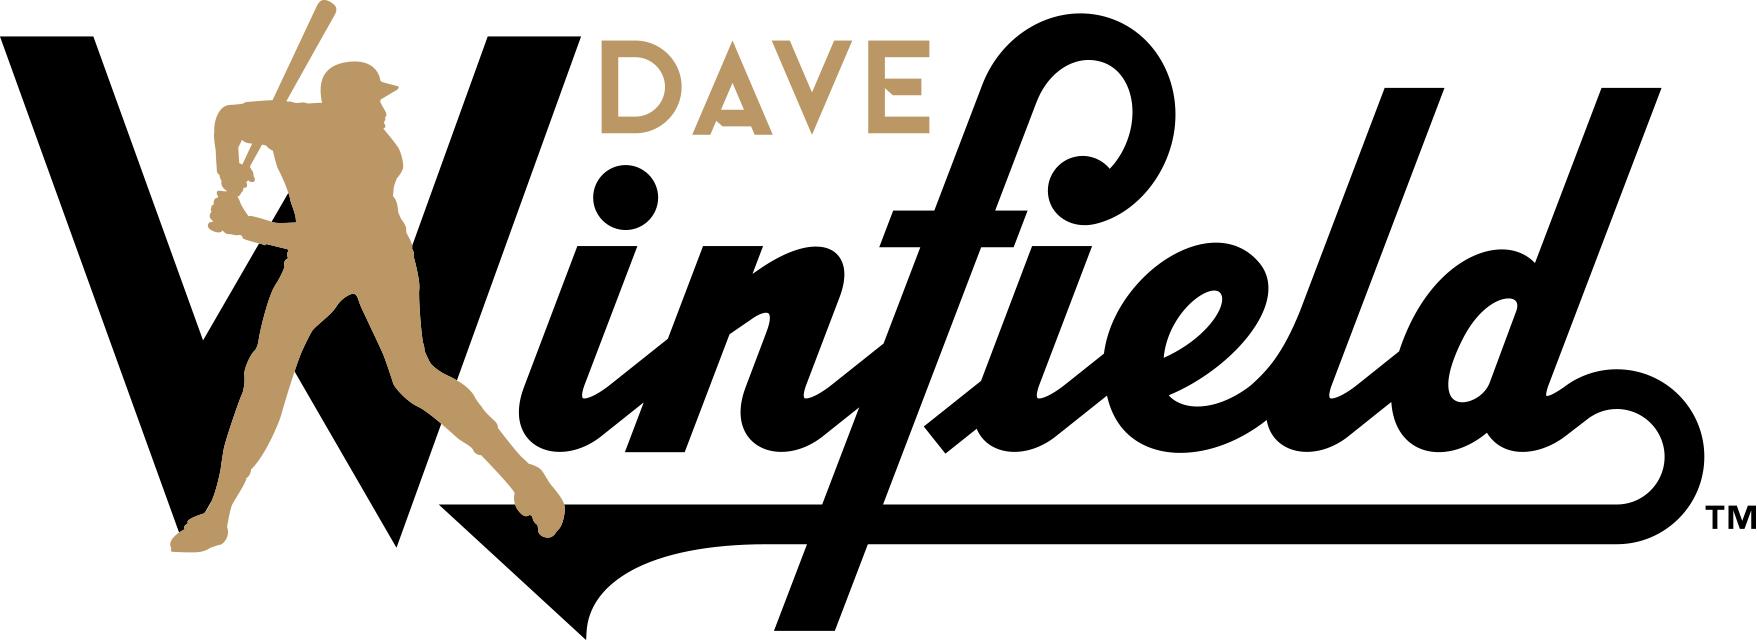 Dave Winfield Hall of Fame – The Official Website of Dave Winfield